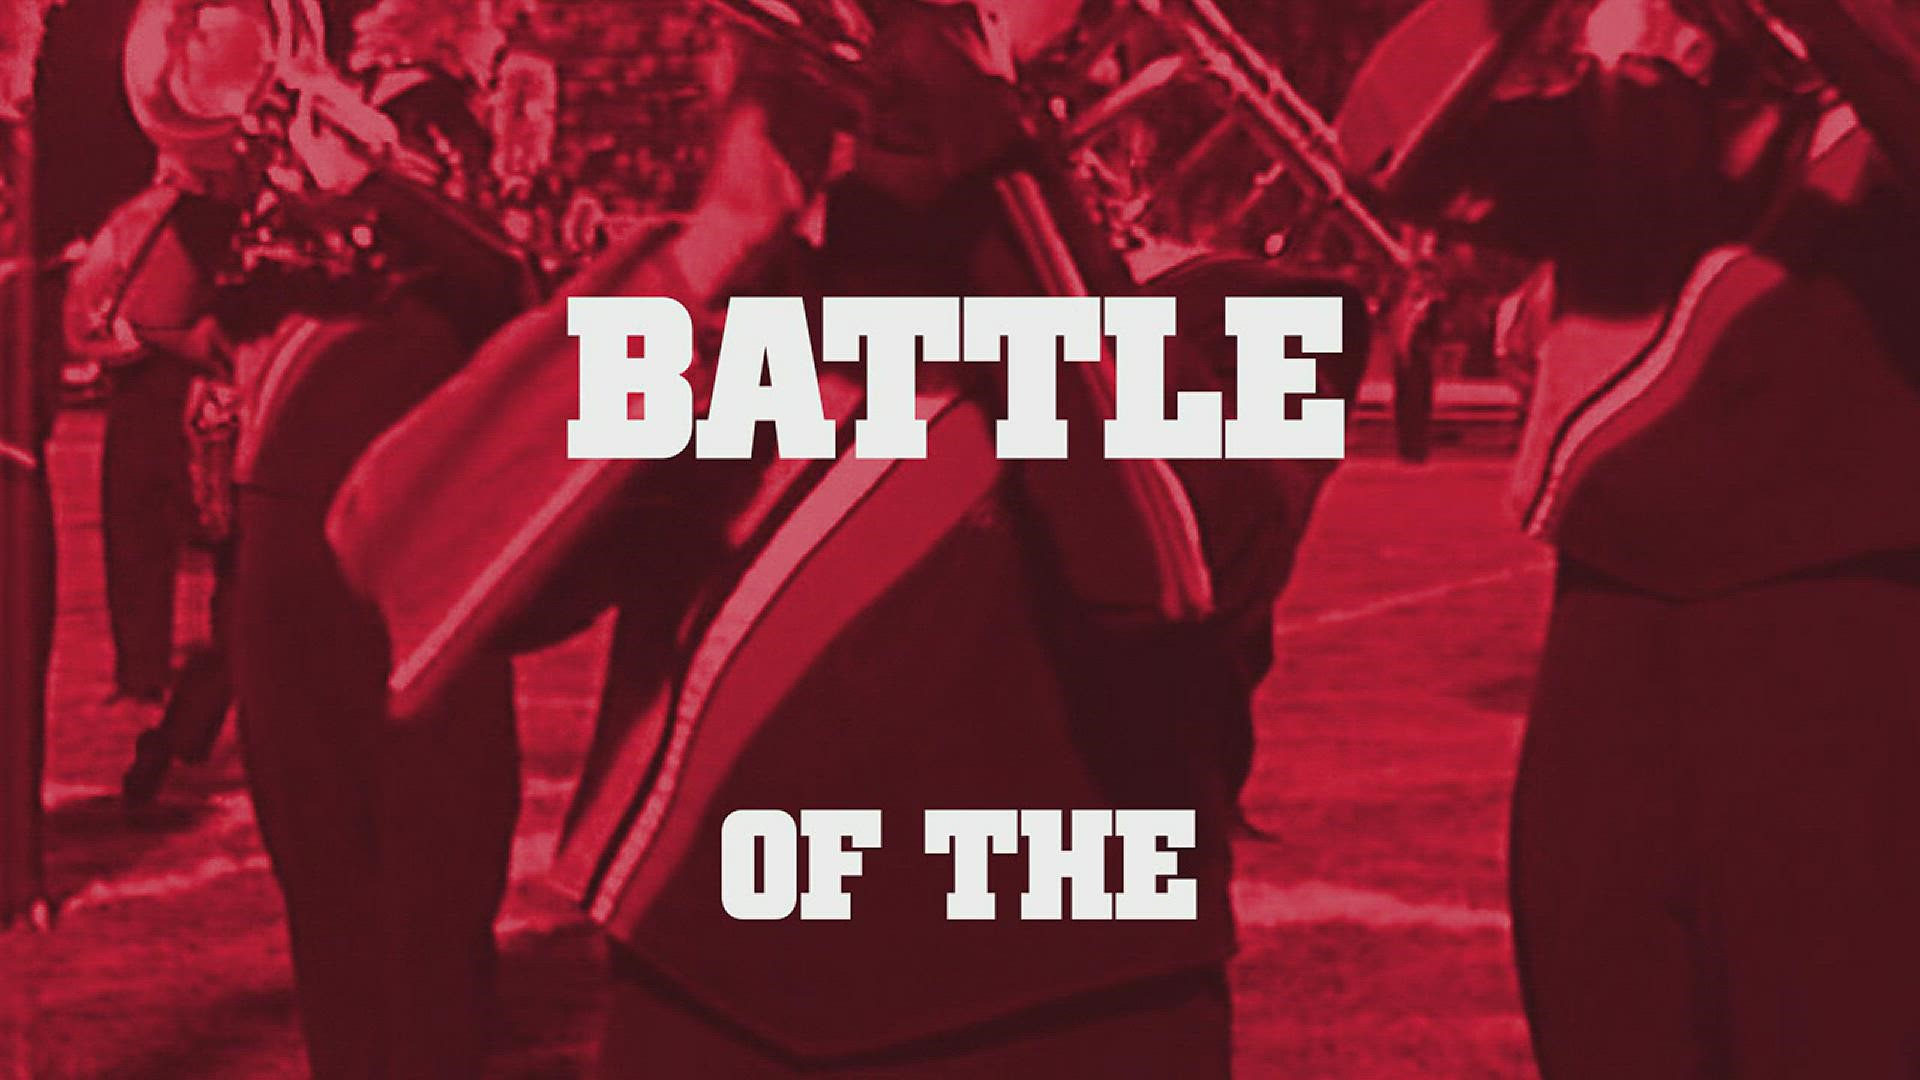 Vote each week for your favorite Southeast Texas high school band!